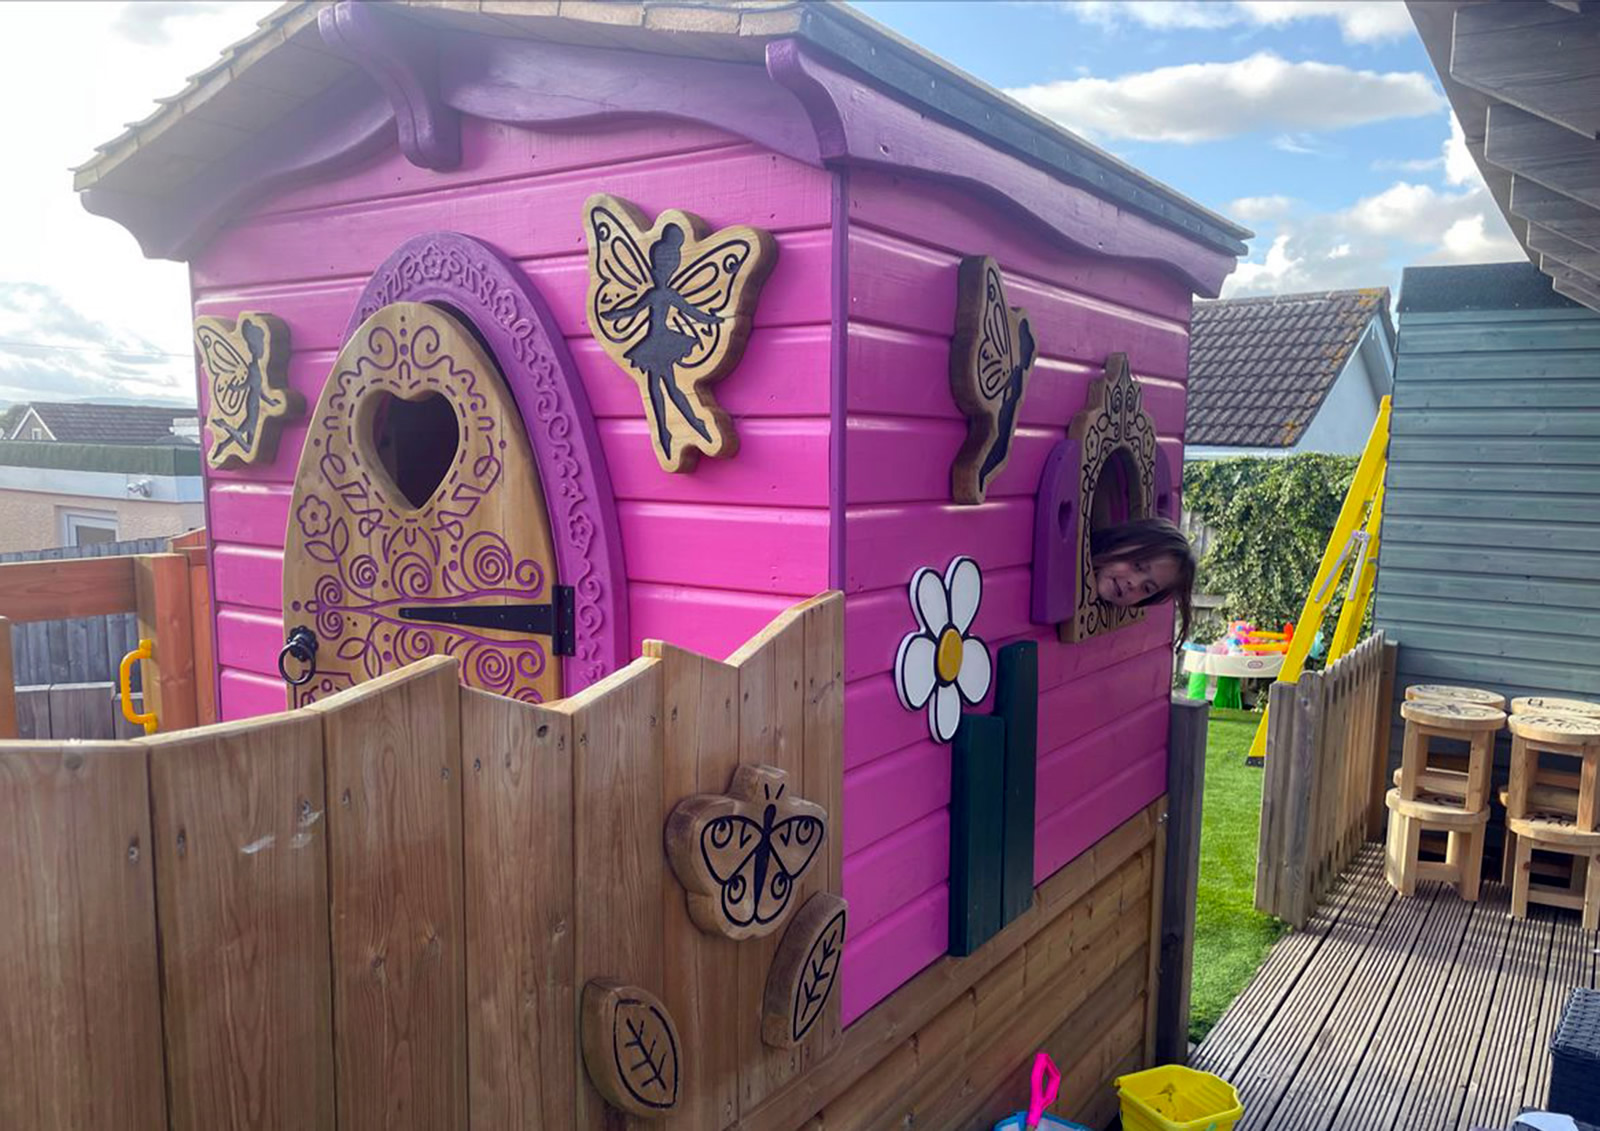 A pretty pink play house with fencing and arched door